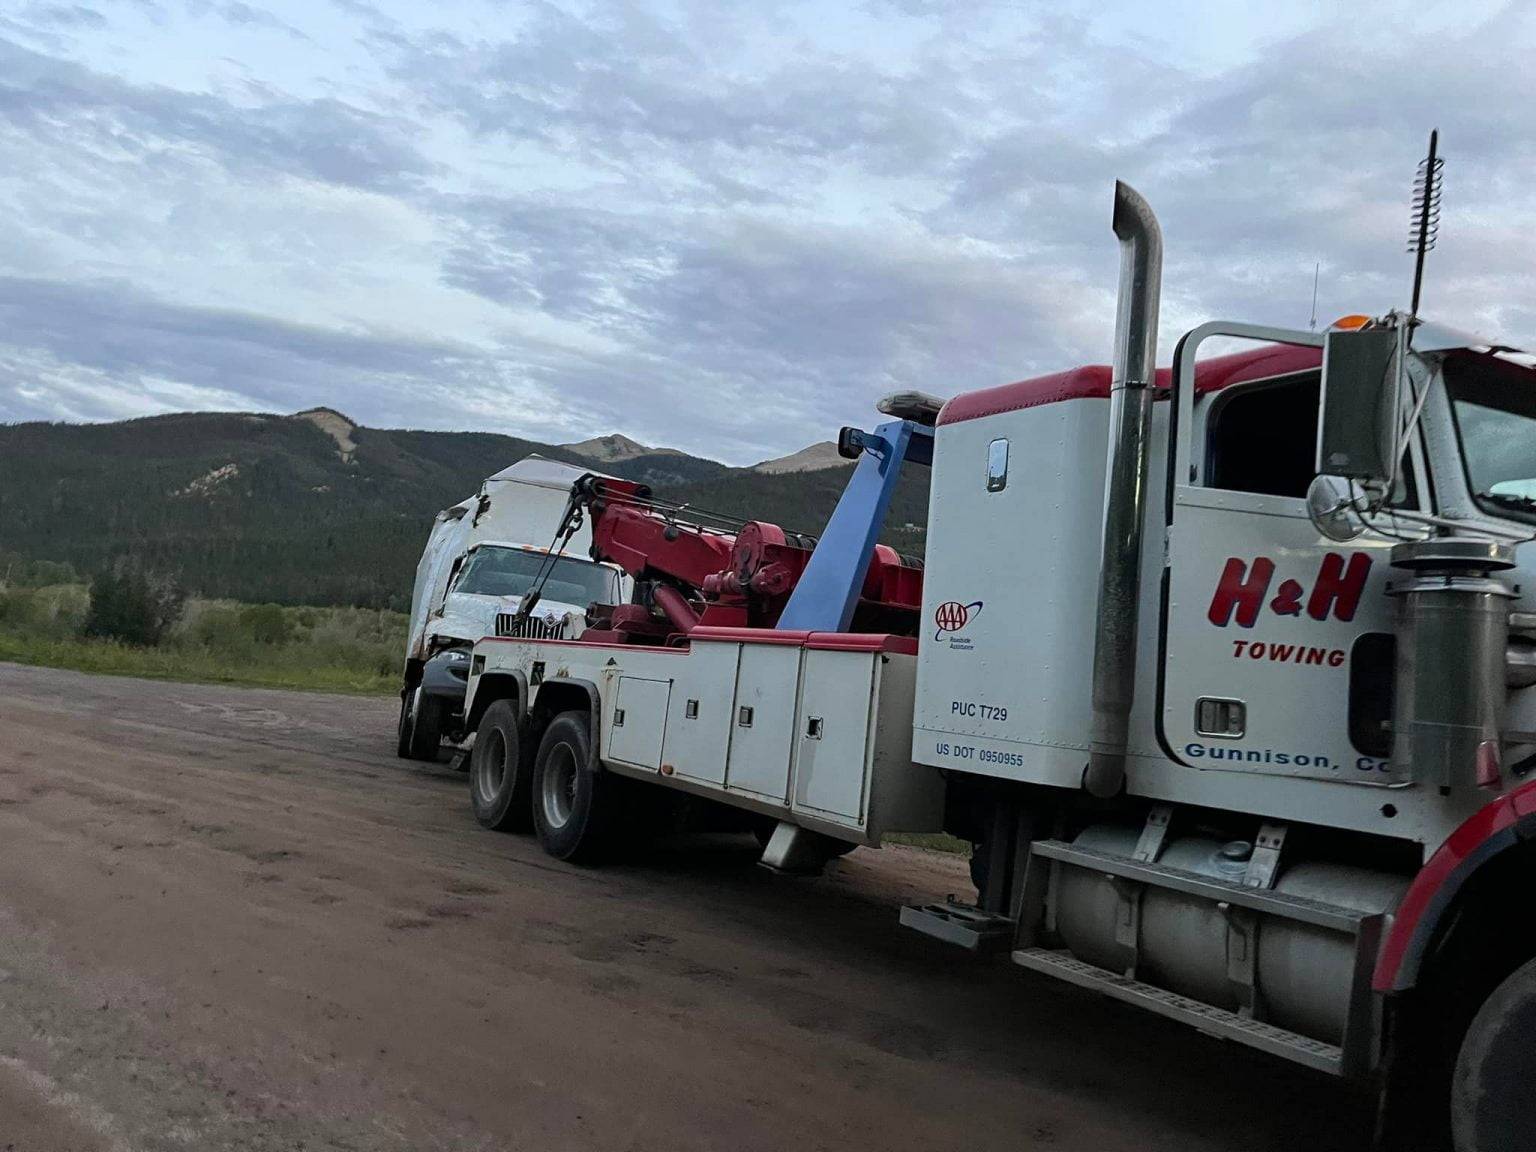 H&h Towing in Gunnison, CO